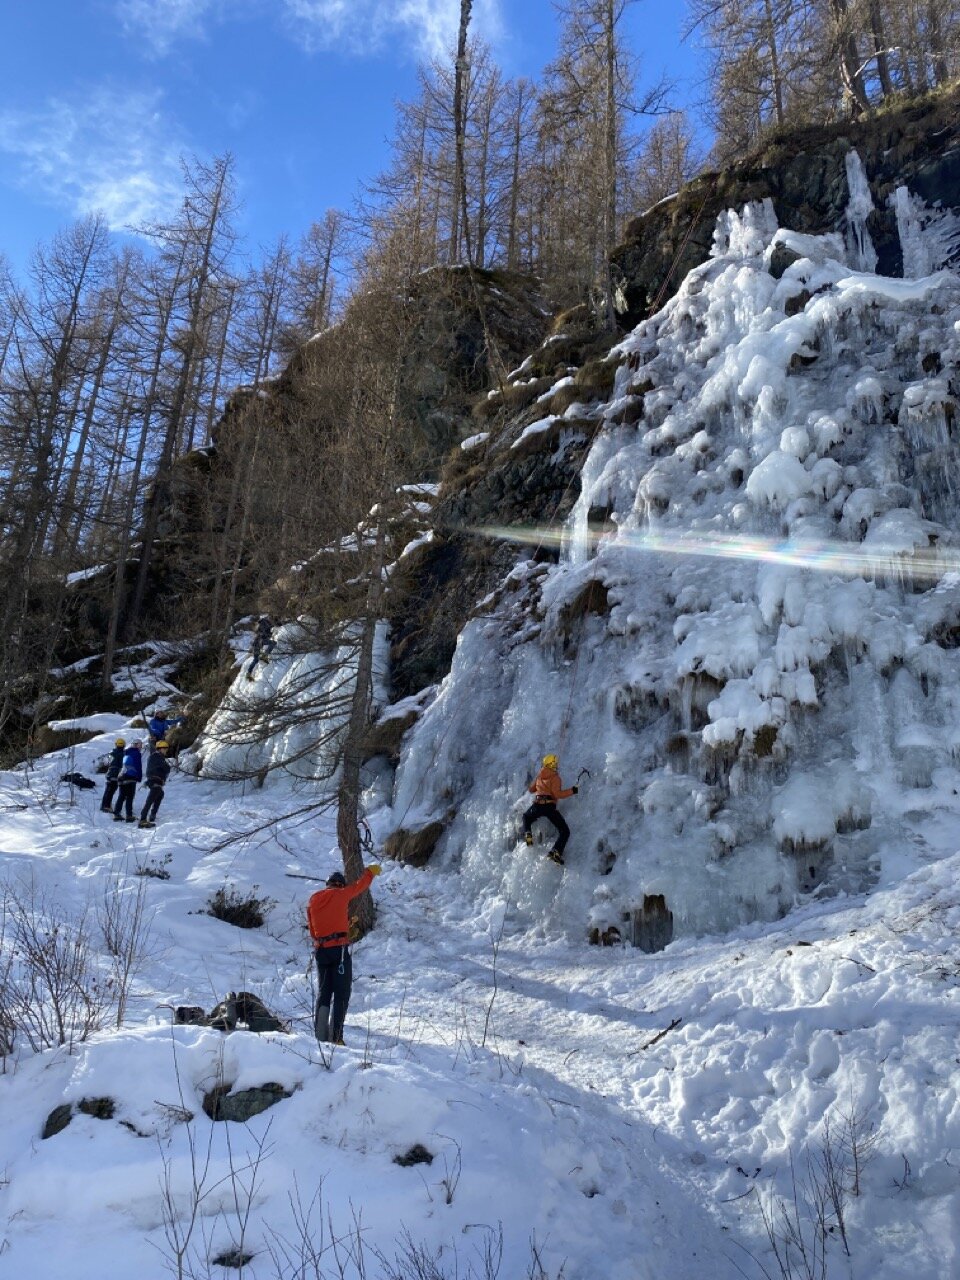 Some photos from a recent ice climbing session. Take your skills to the next level! Come and learn the basic principles with our expert guides. They will show you the ropes and axes!
Gert, in touch for more information.

Alcune foto da una recente se